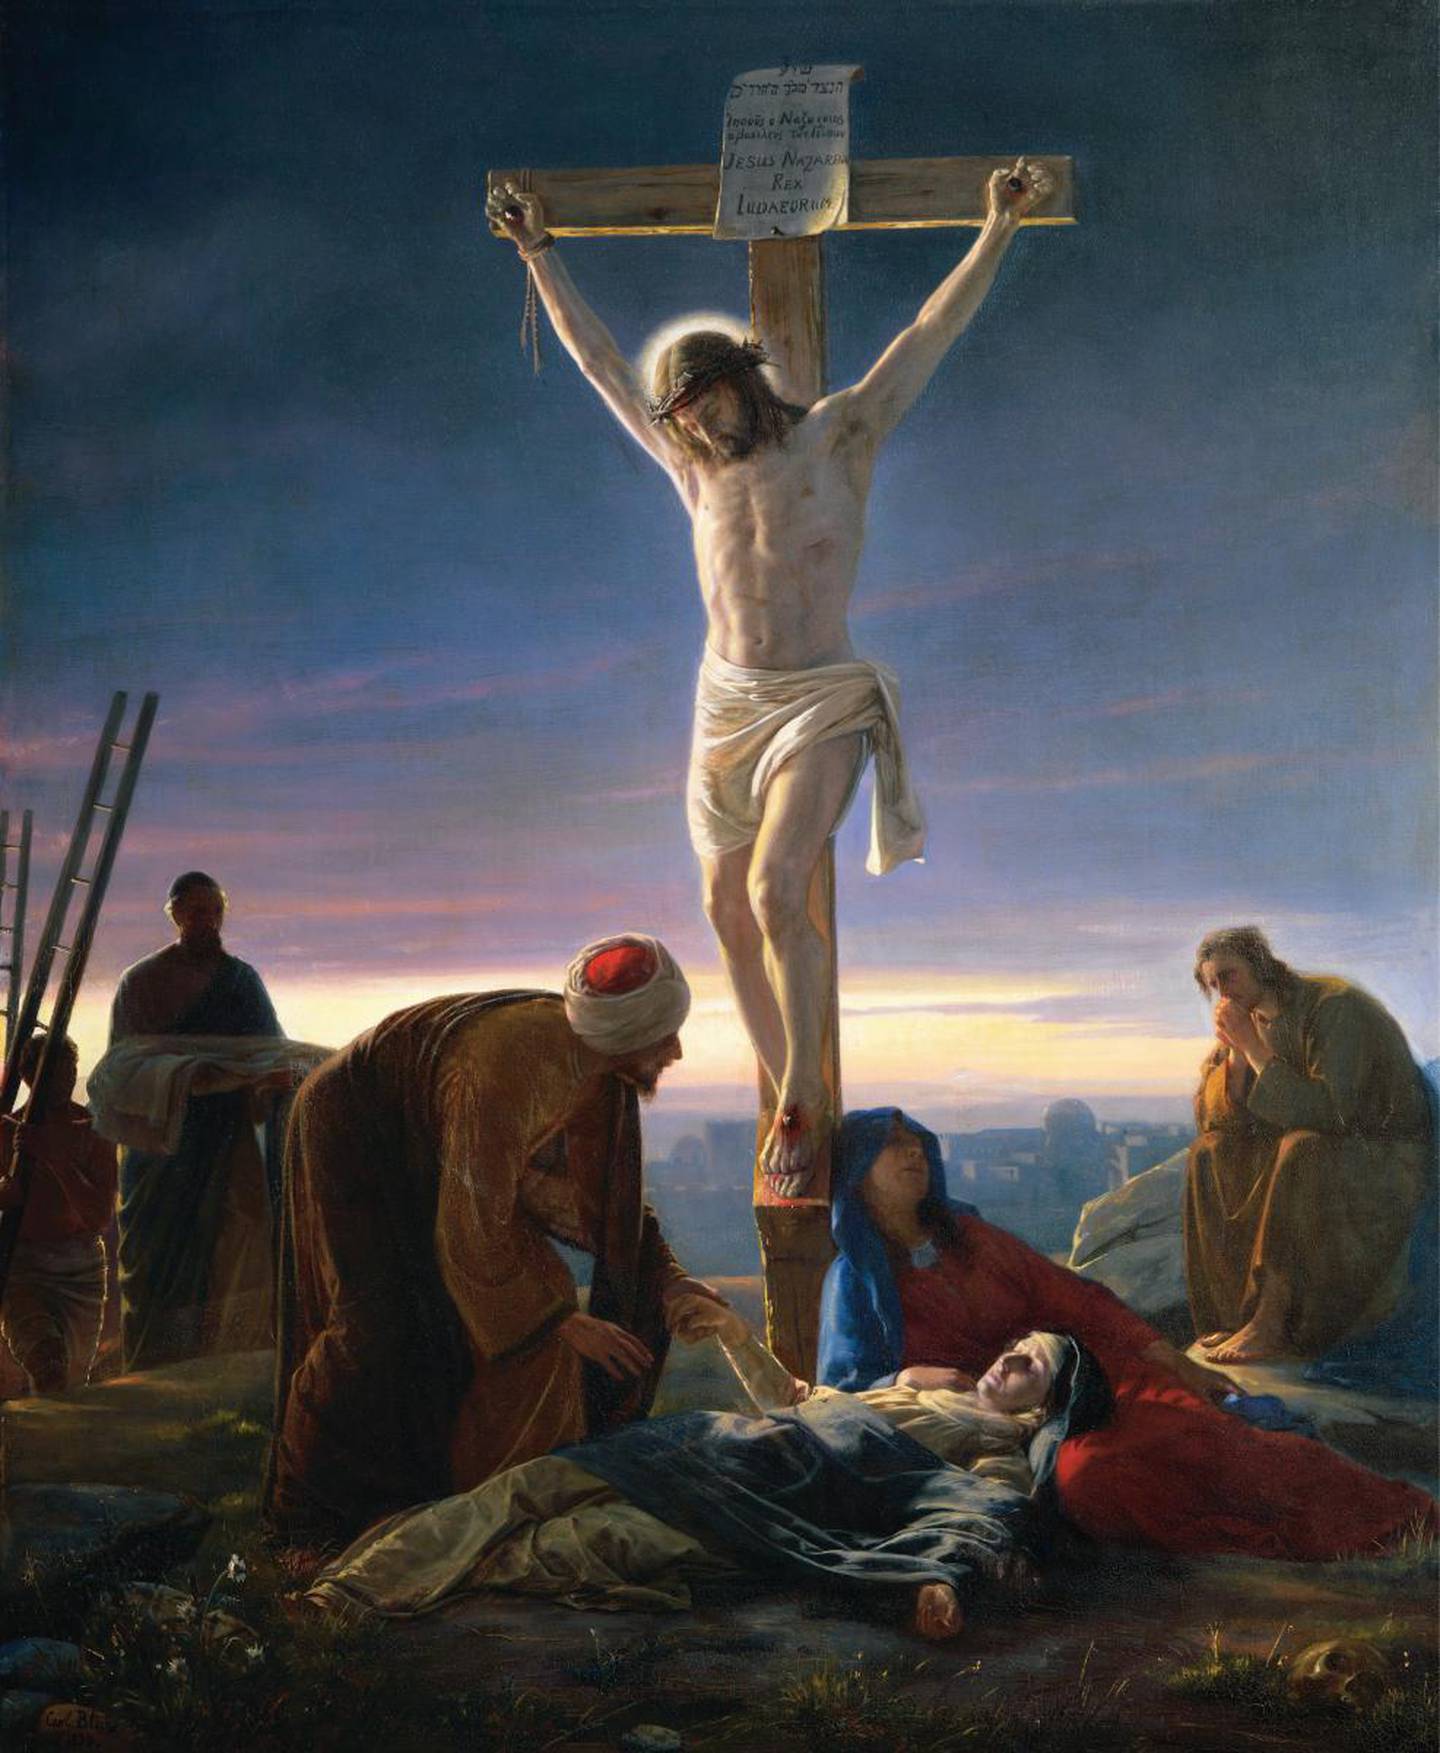 Faithful reproduction of the painting "Christ on the Cross", by Carl Heinrich Bloch in 1870.